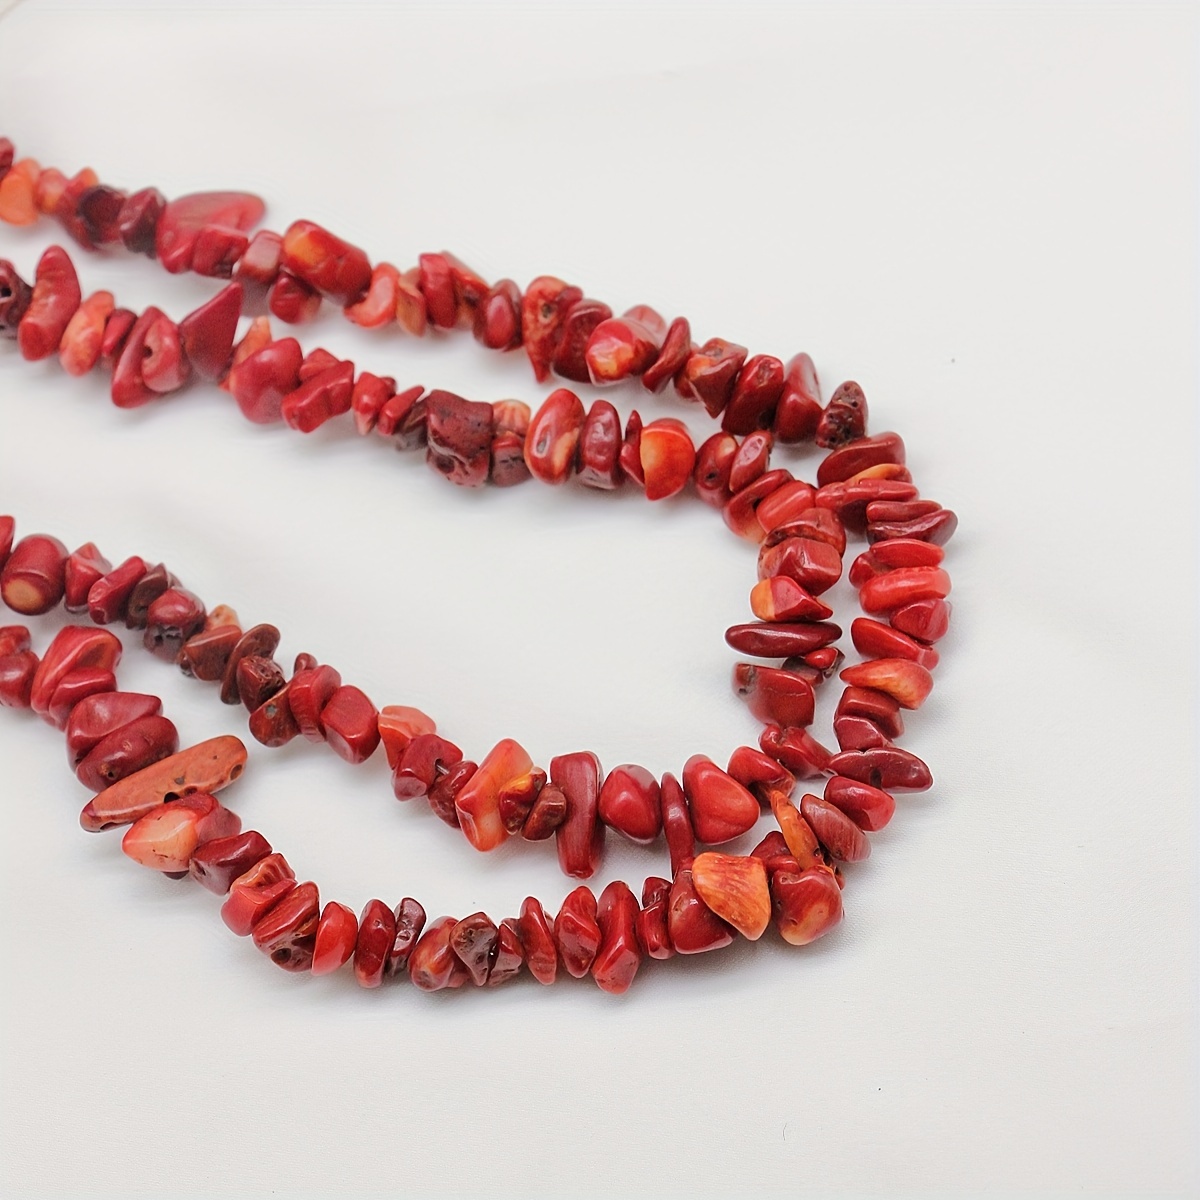 

1pc Natural Red Coral Chips Stone Beads, 200pcs, 5-8mm Irregular Crystals, Diy Jewelry Making Supplies For Bracelet, Necklace, Earrings